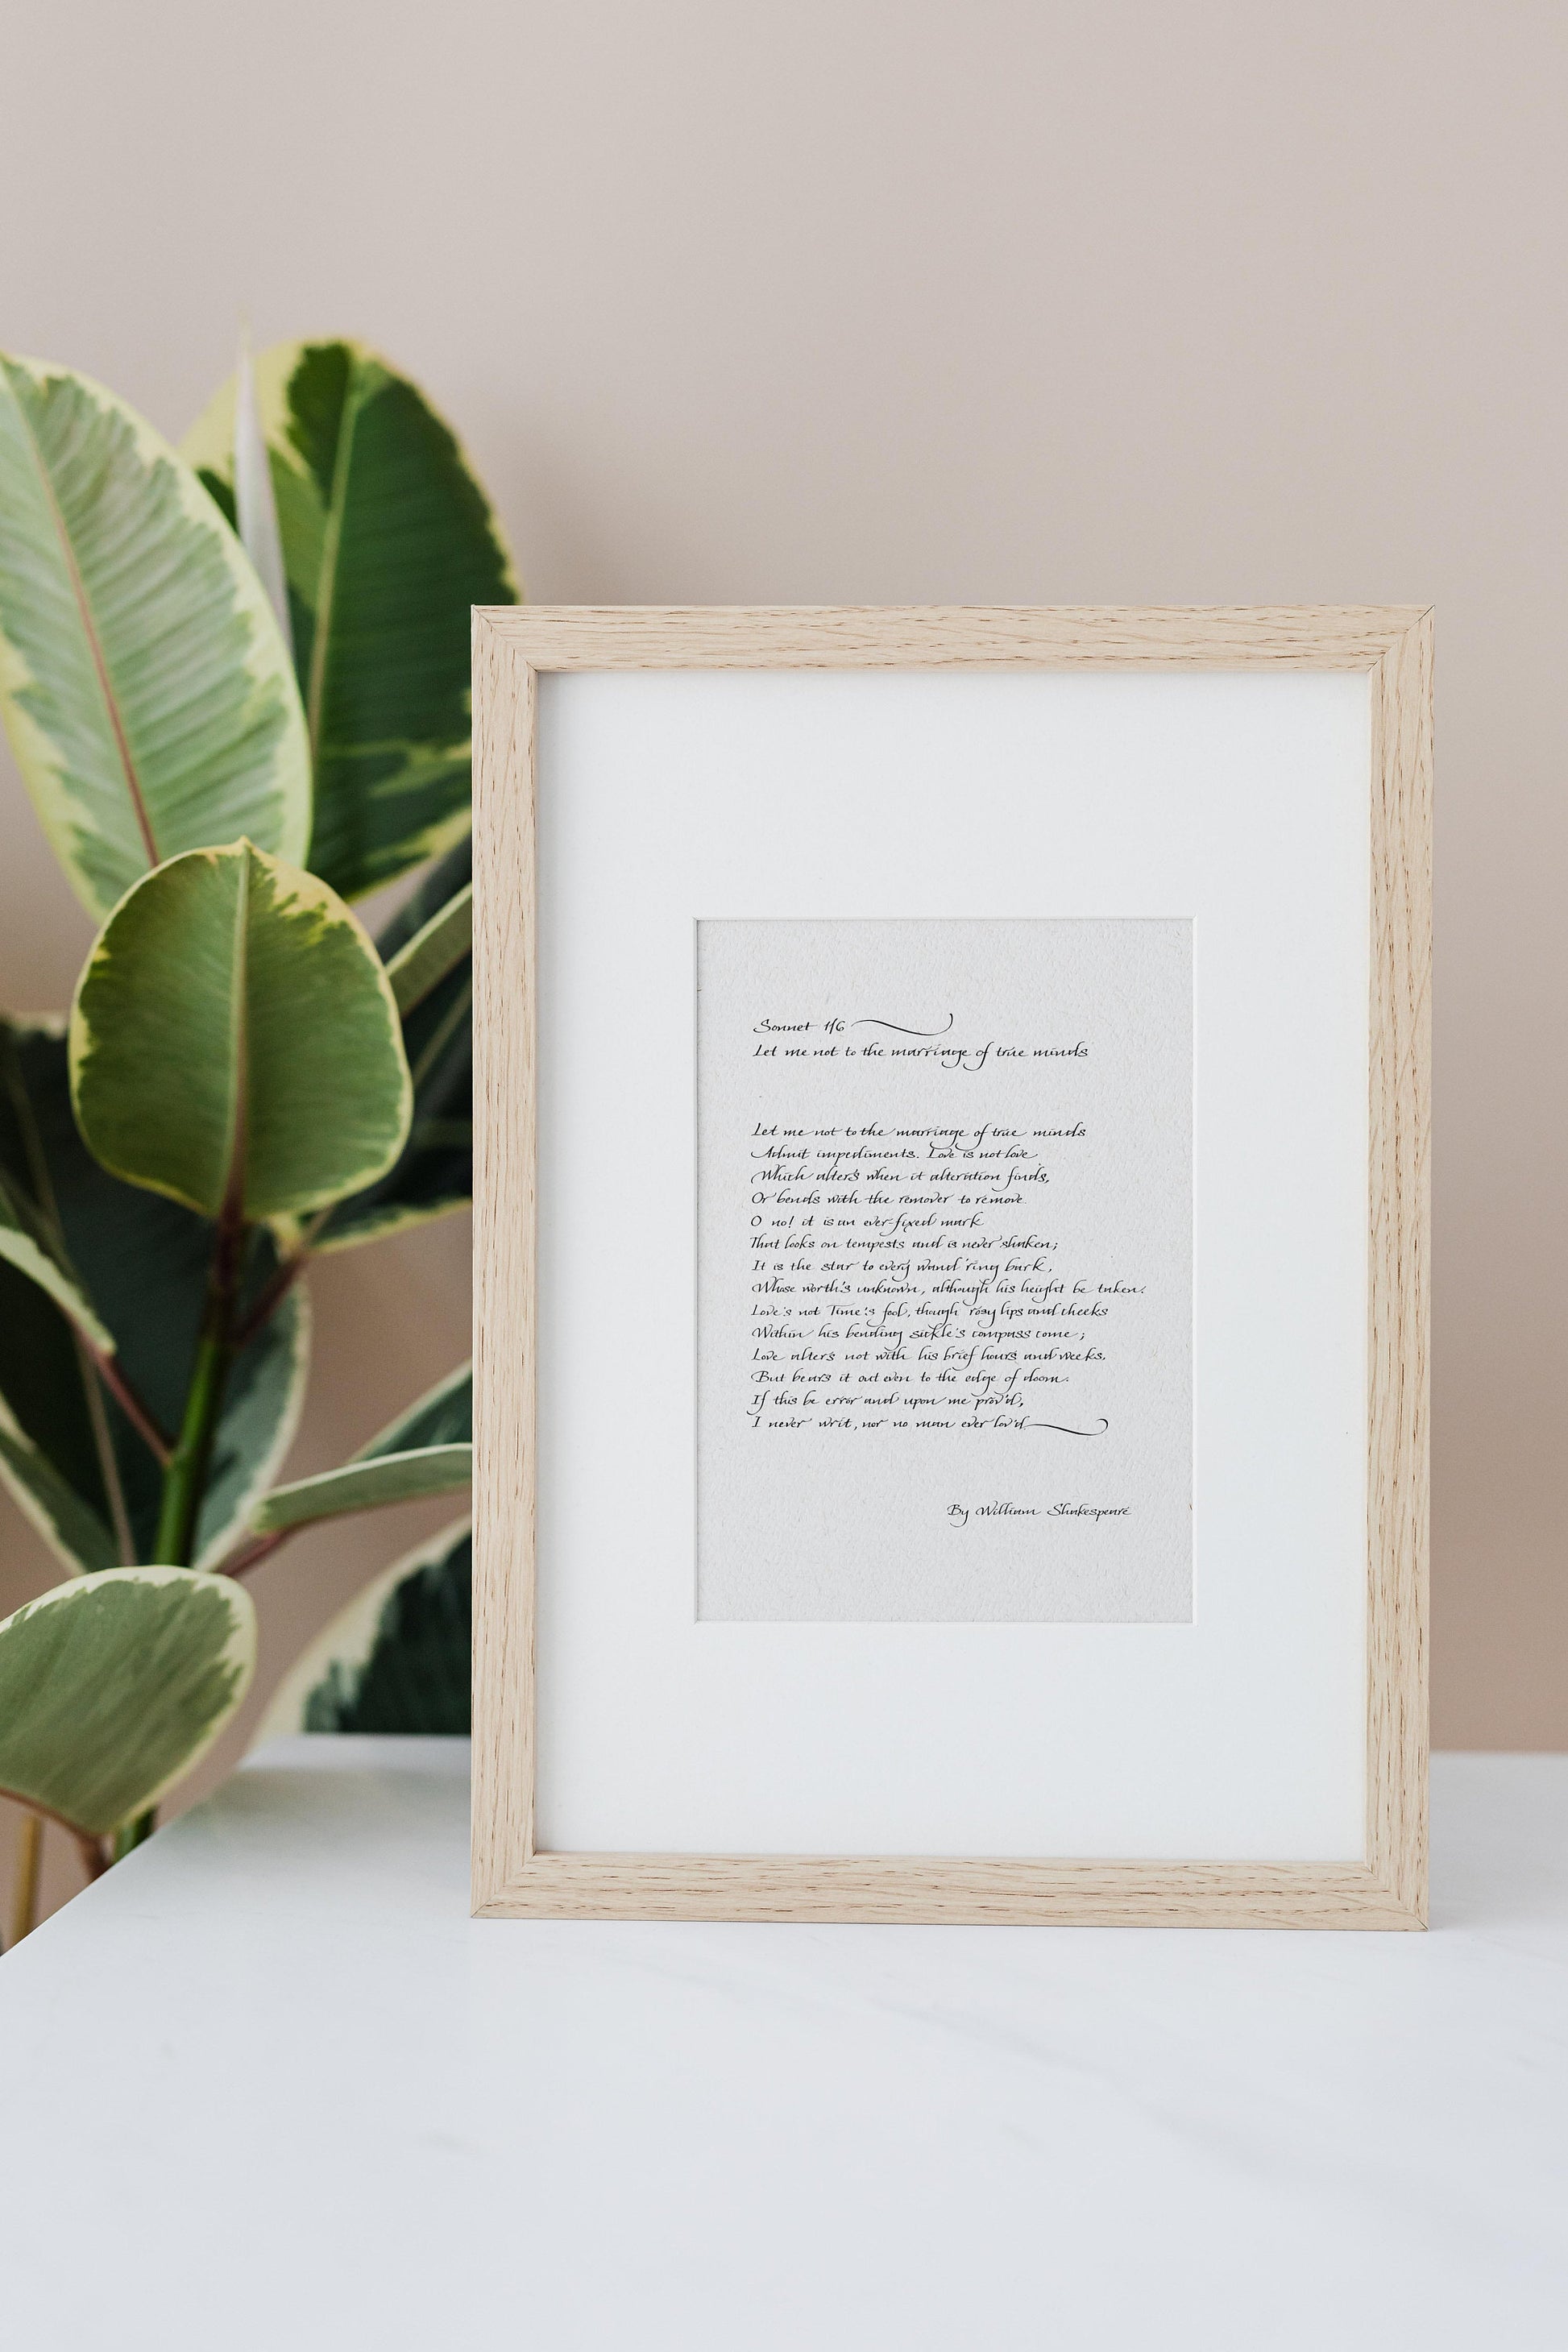 Sonnet 116 Shakespeare Framed Calligraphy Print - William Shakespeare - Let me not to the marriage of true minds print wedding gift Poster